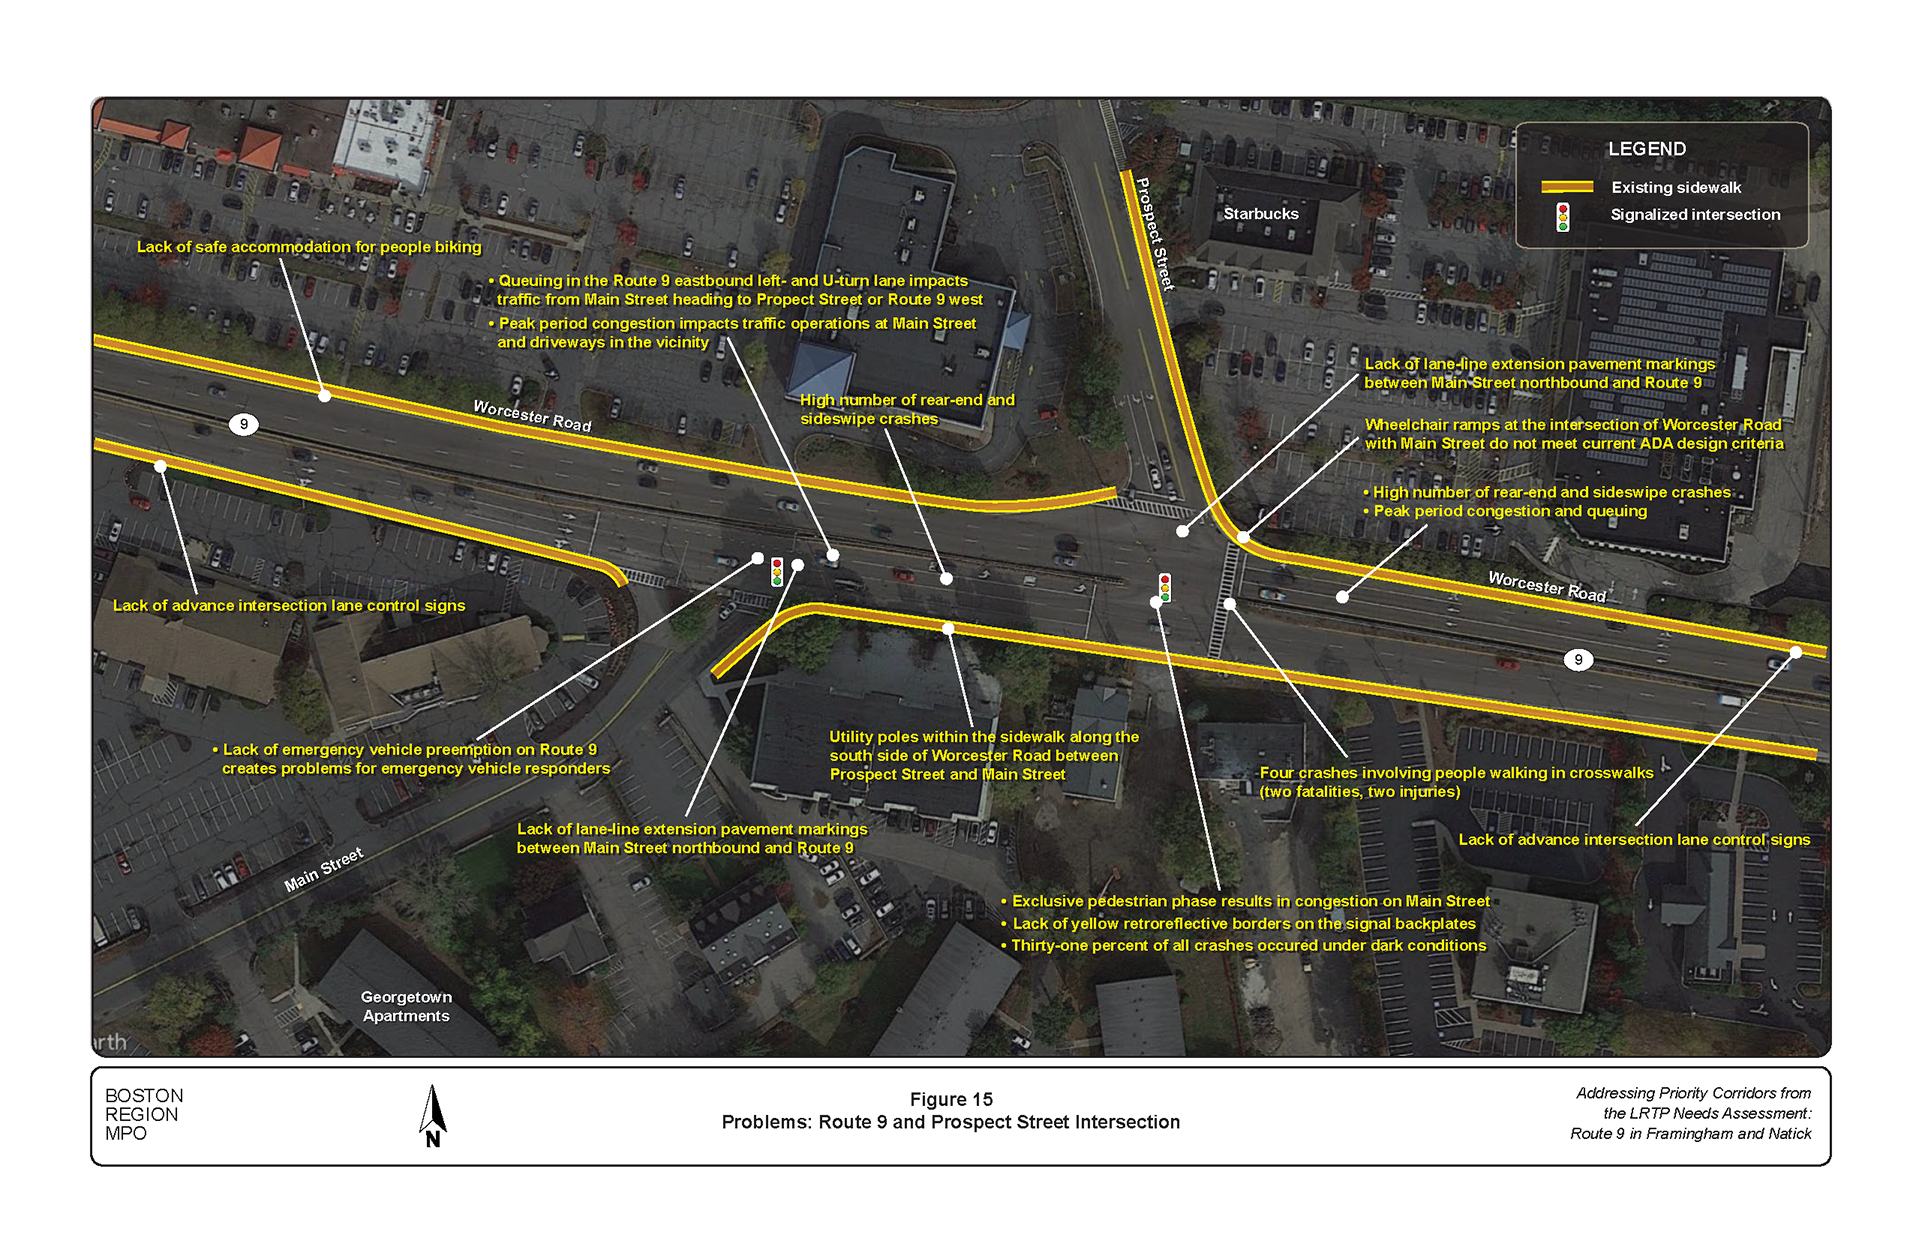 Figure 15 is an aerial photo showing the intersection of Route 9 and Prospect Street and the problems